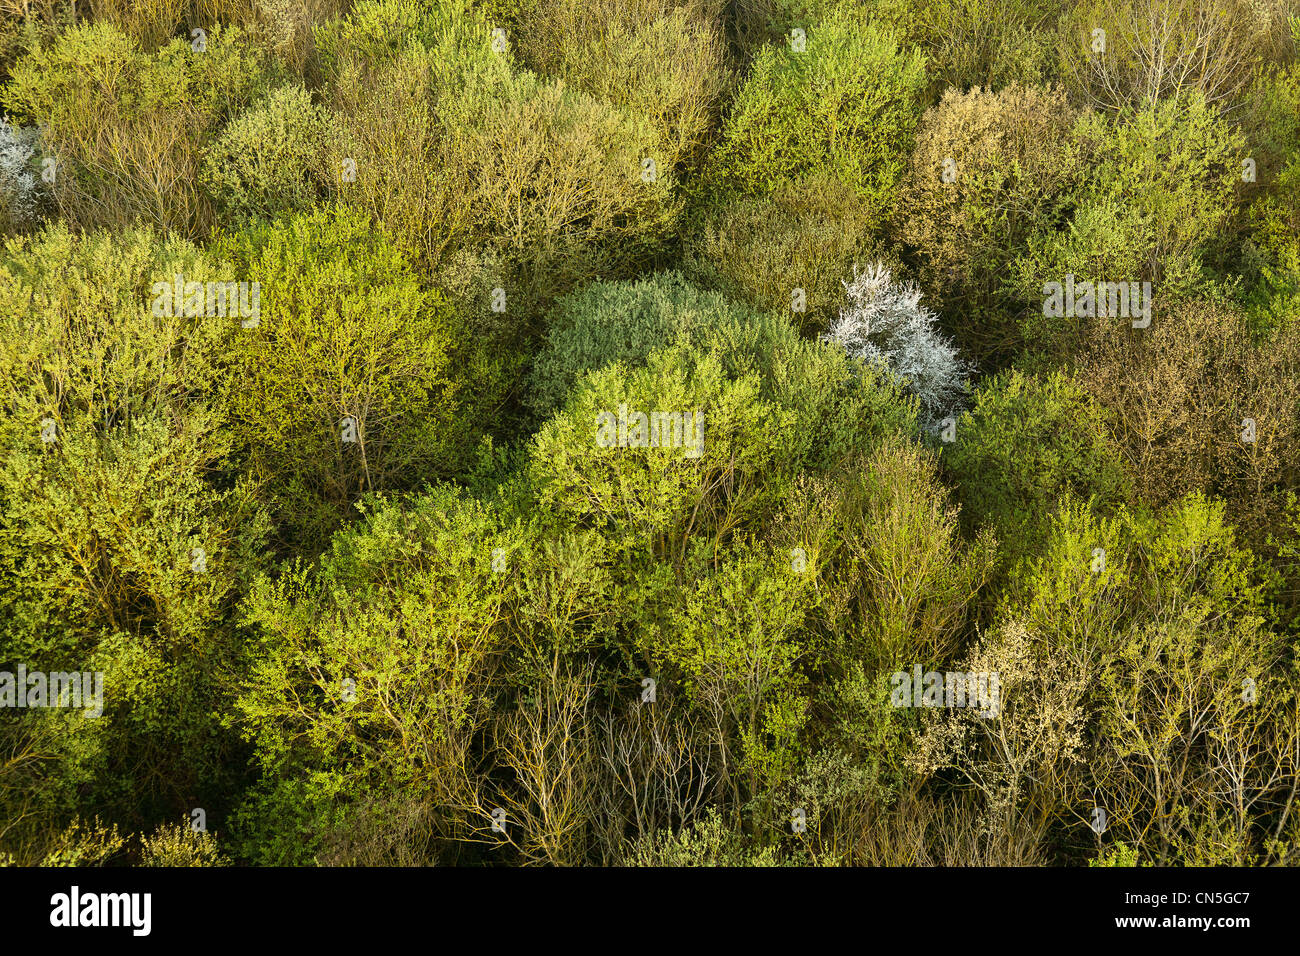 France, Eure, Saint Pierre la Garenne, forest, leaf development in early spring (aerial view) Stock Photo